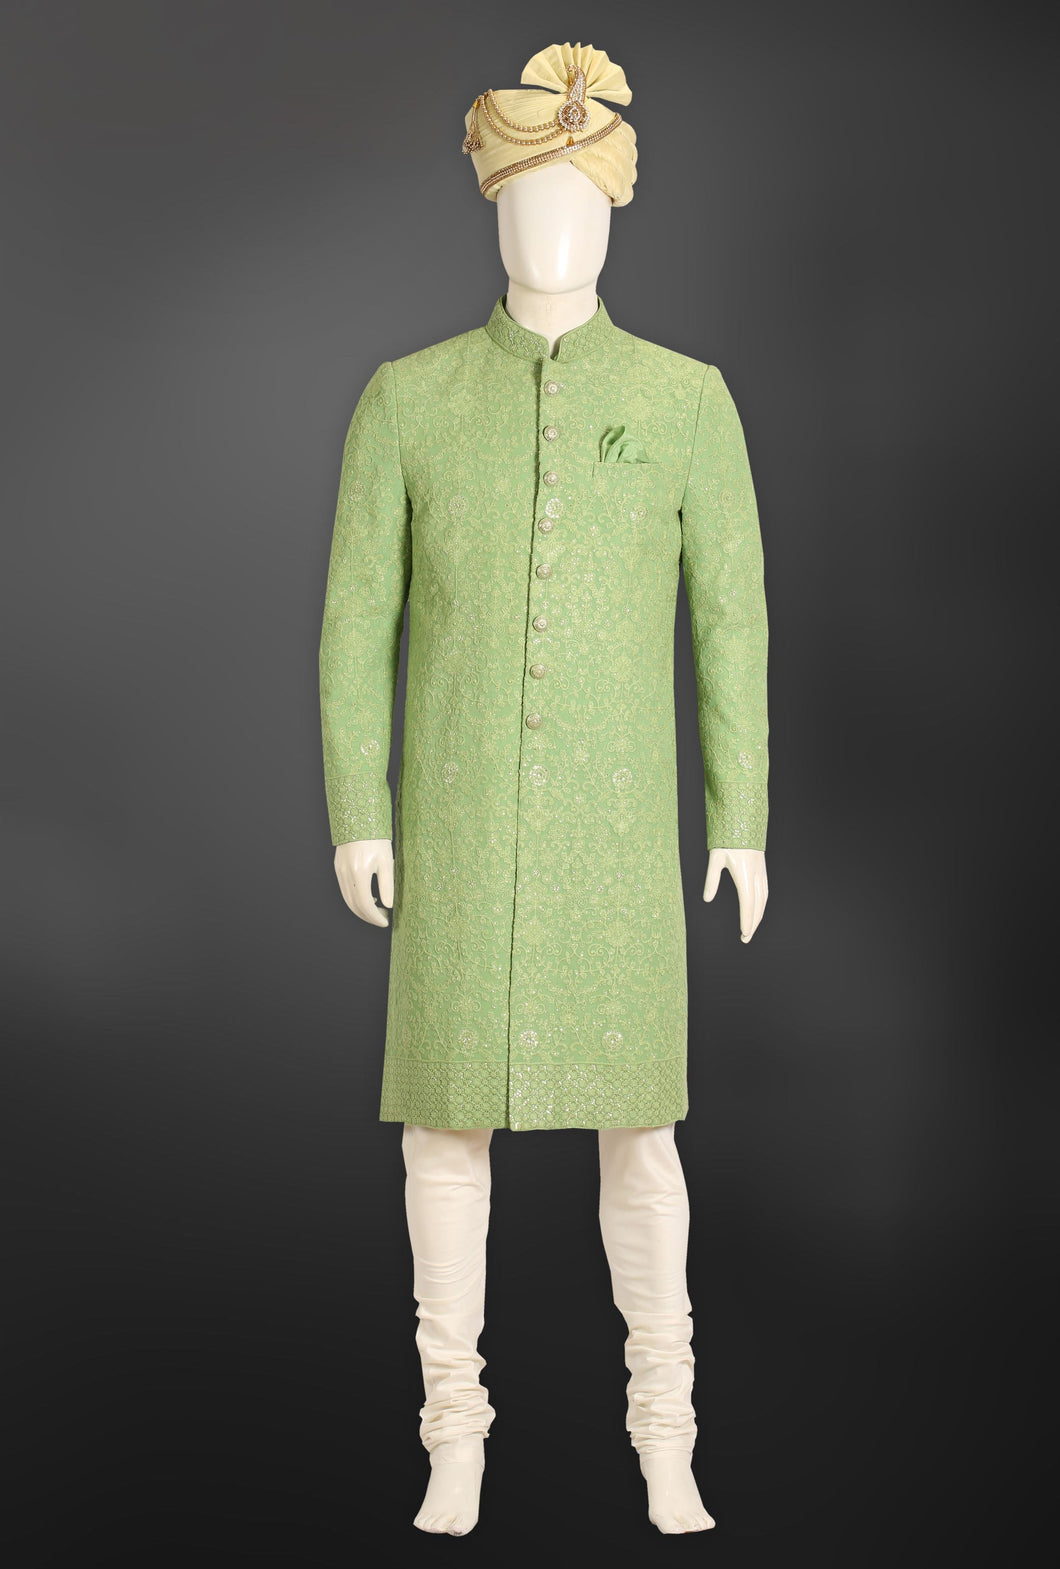 C GREEN SEQUINS WORKED SHERWANI FOR GROOM